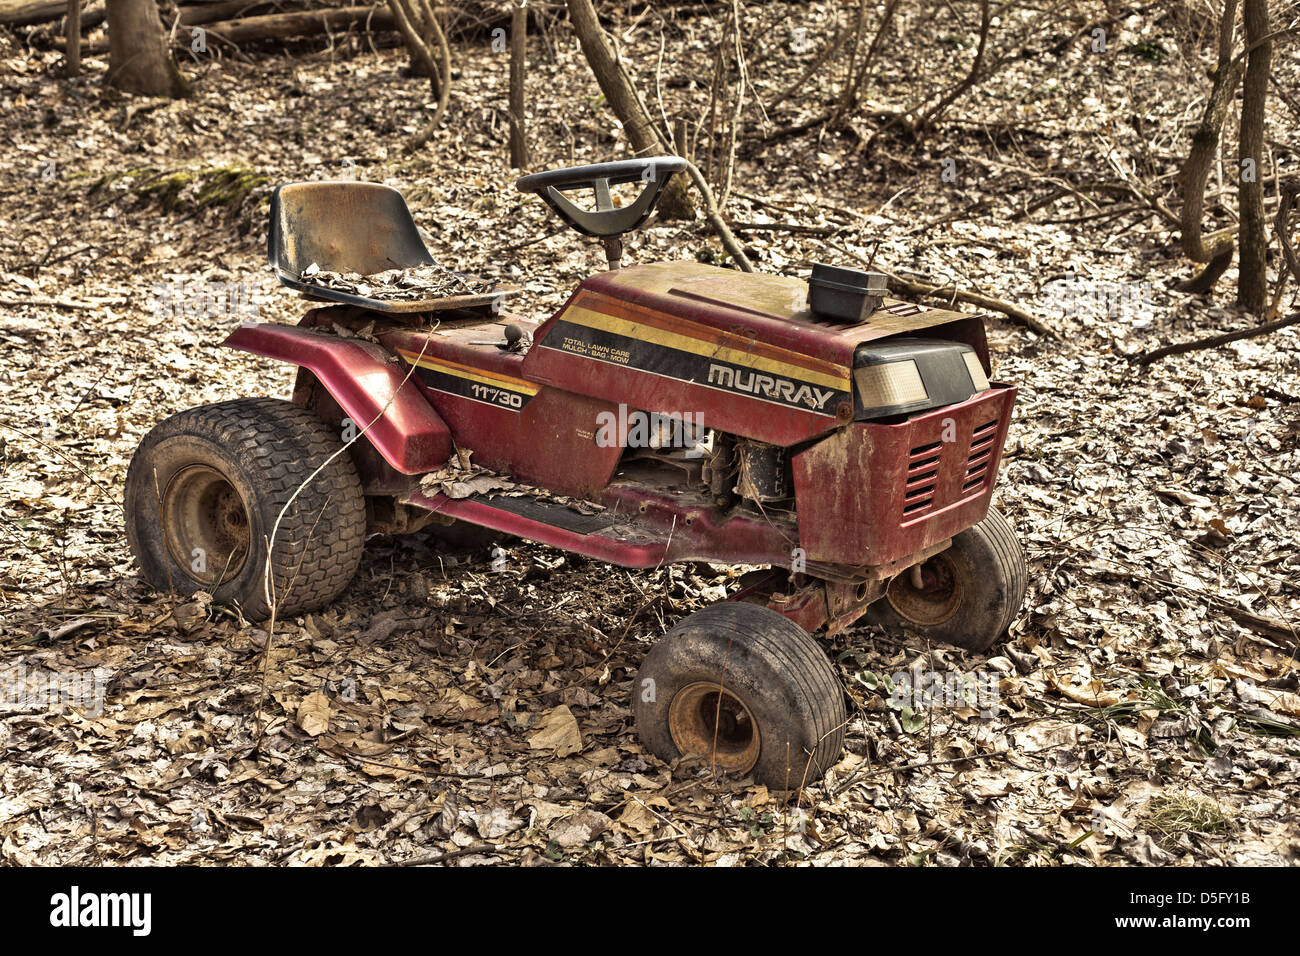 ride on lawn mower left in the woods rusting away Stock Photo